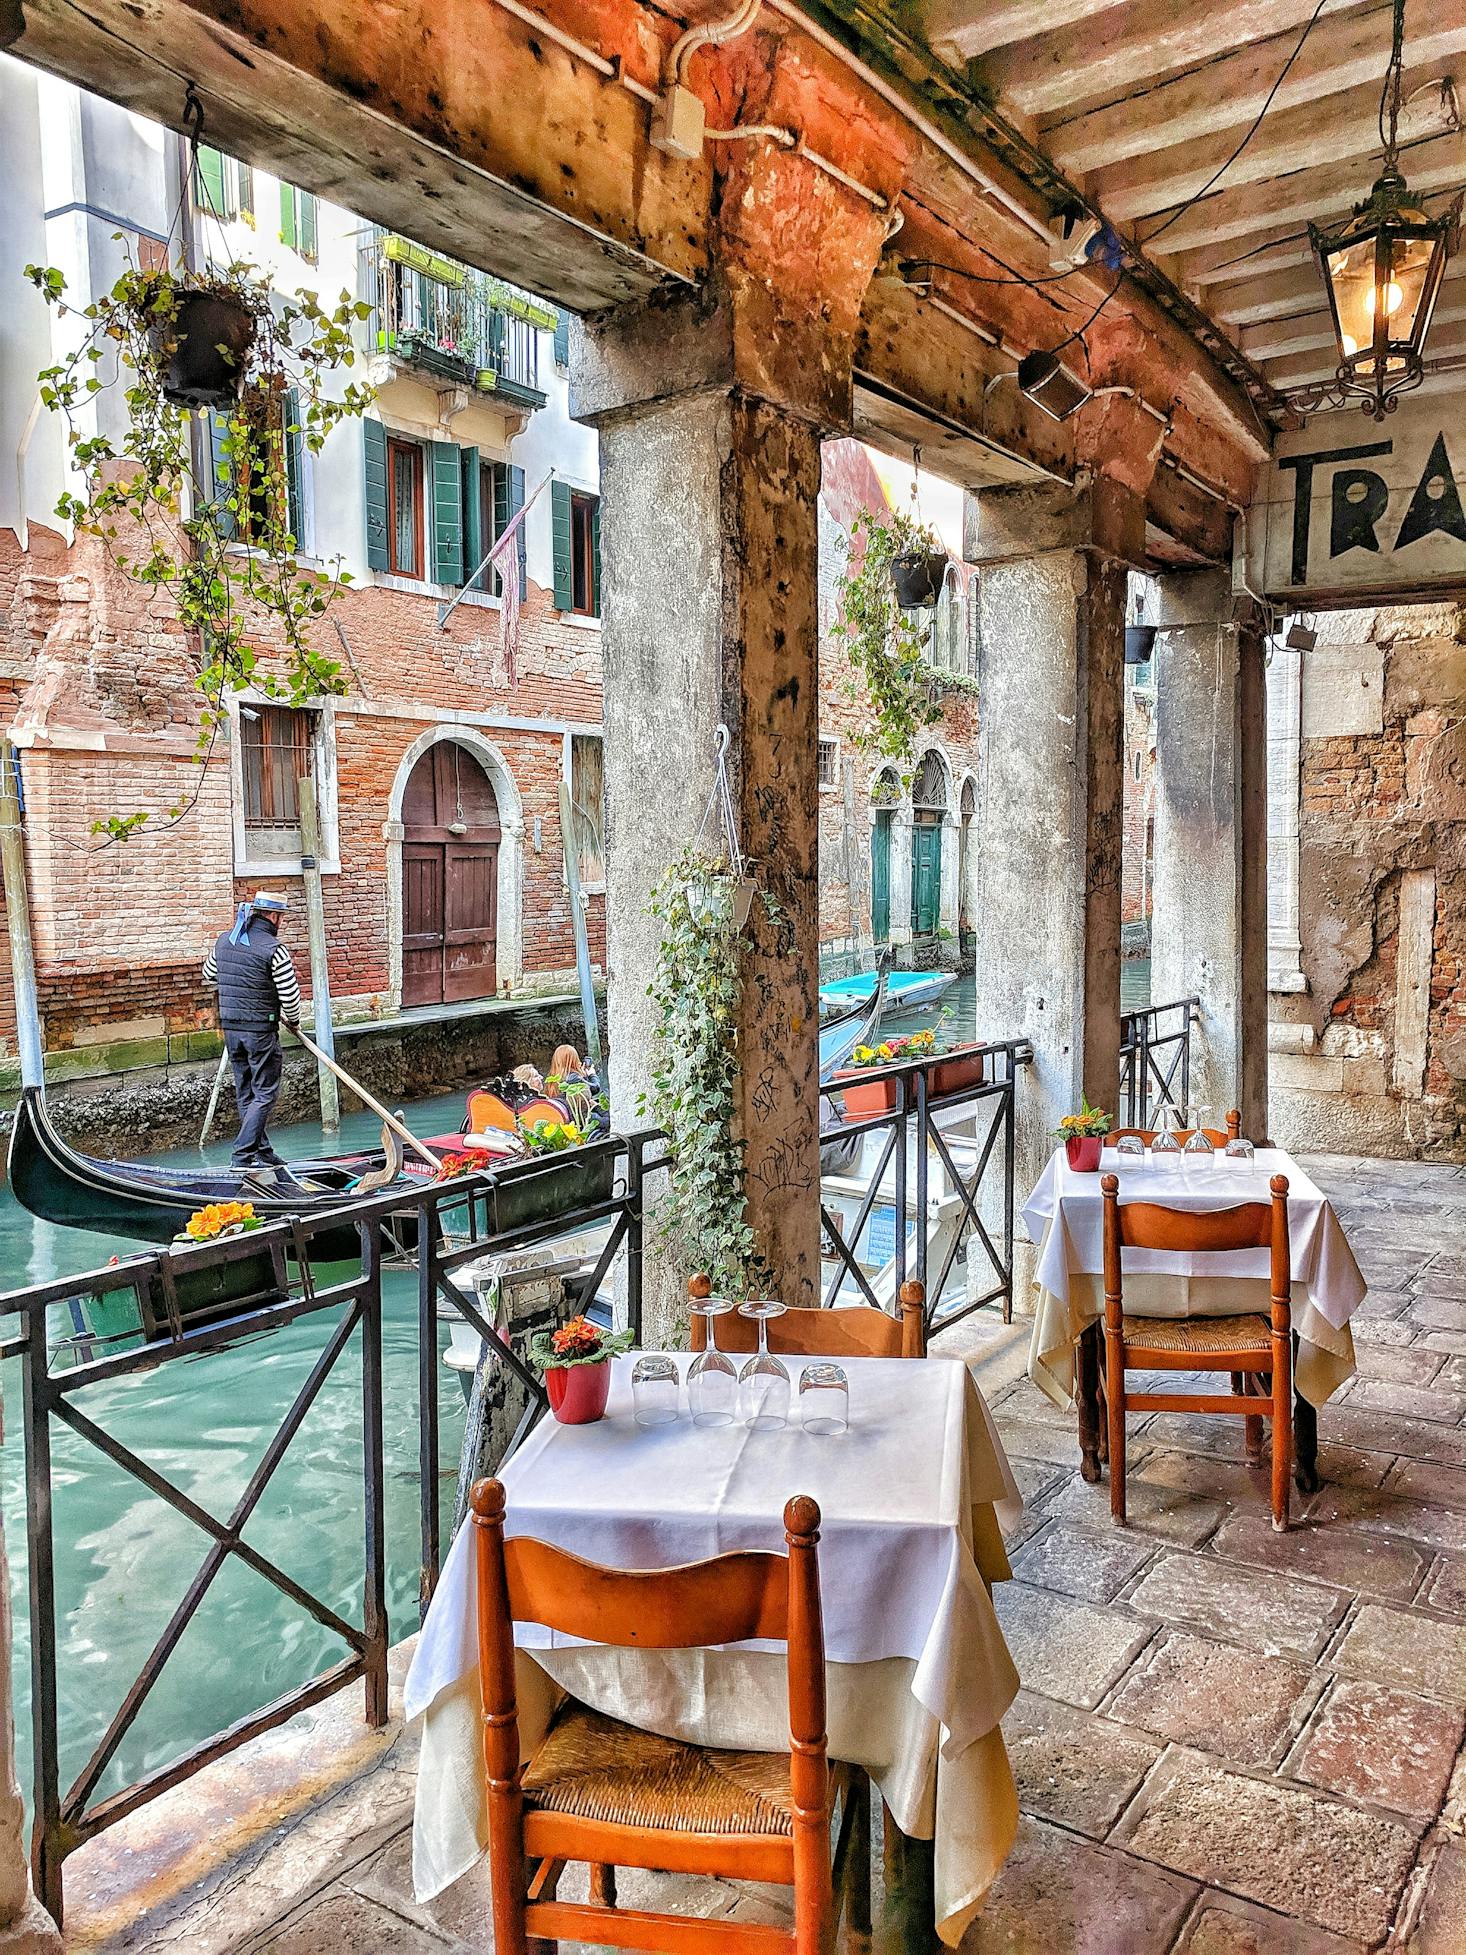 Brunch with a canal view in Venice